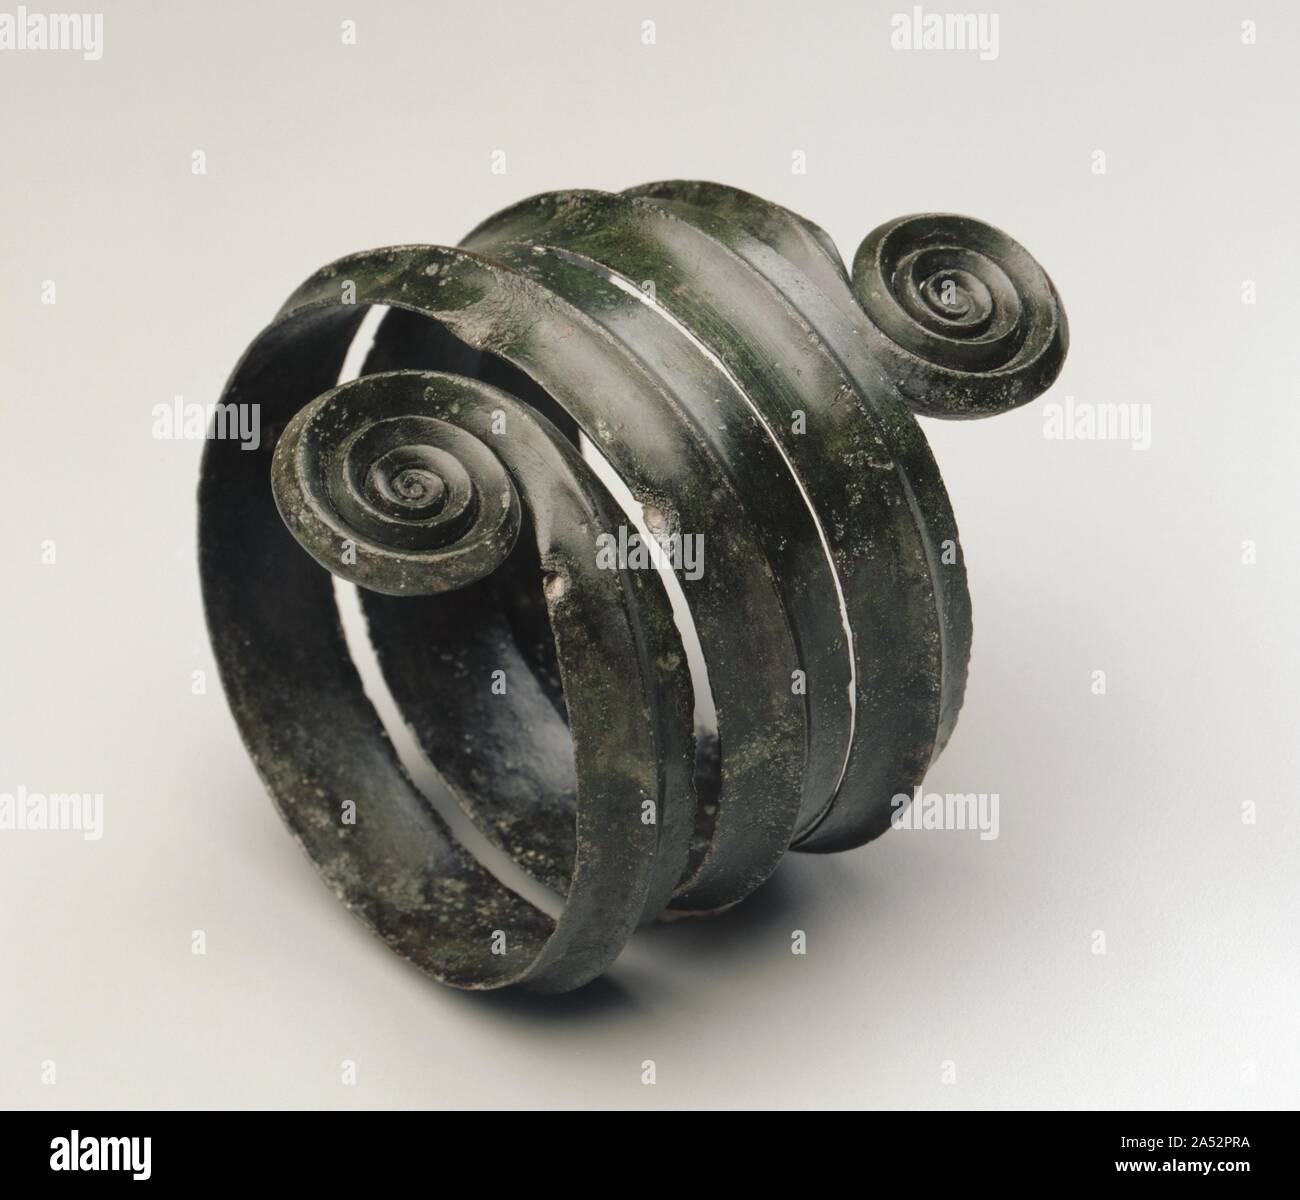 Turned Armilla, c. 1500 BC. Europe. As the spiral mimics forms found in nature - specifically in nautilus shells - it is the basis for logarithmic measures of progression in measurement and growth, which in turn help establish the Fibonacci sequence. Through this sequence we can analyze the phenomenon of spiral designs, specifically in nautilus shells, where the radius of each new chamber grows at a rate determined by a specific proportion to the previous one. Stock Photo